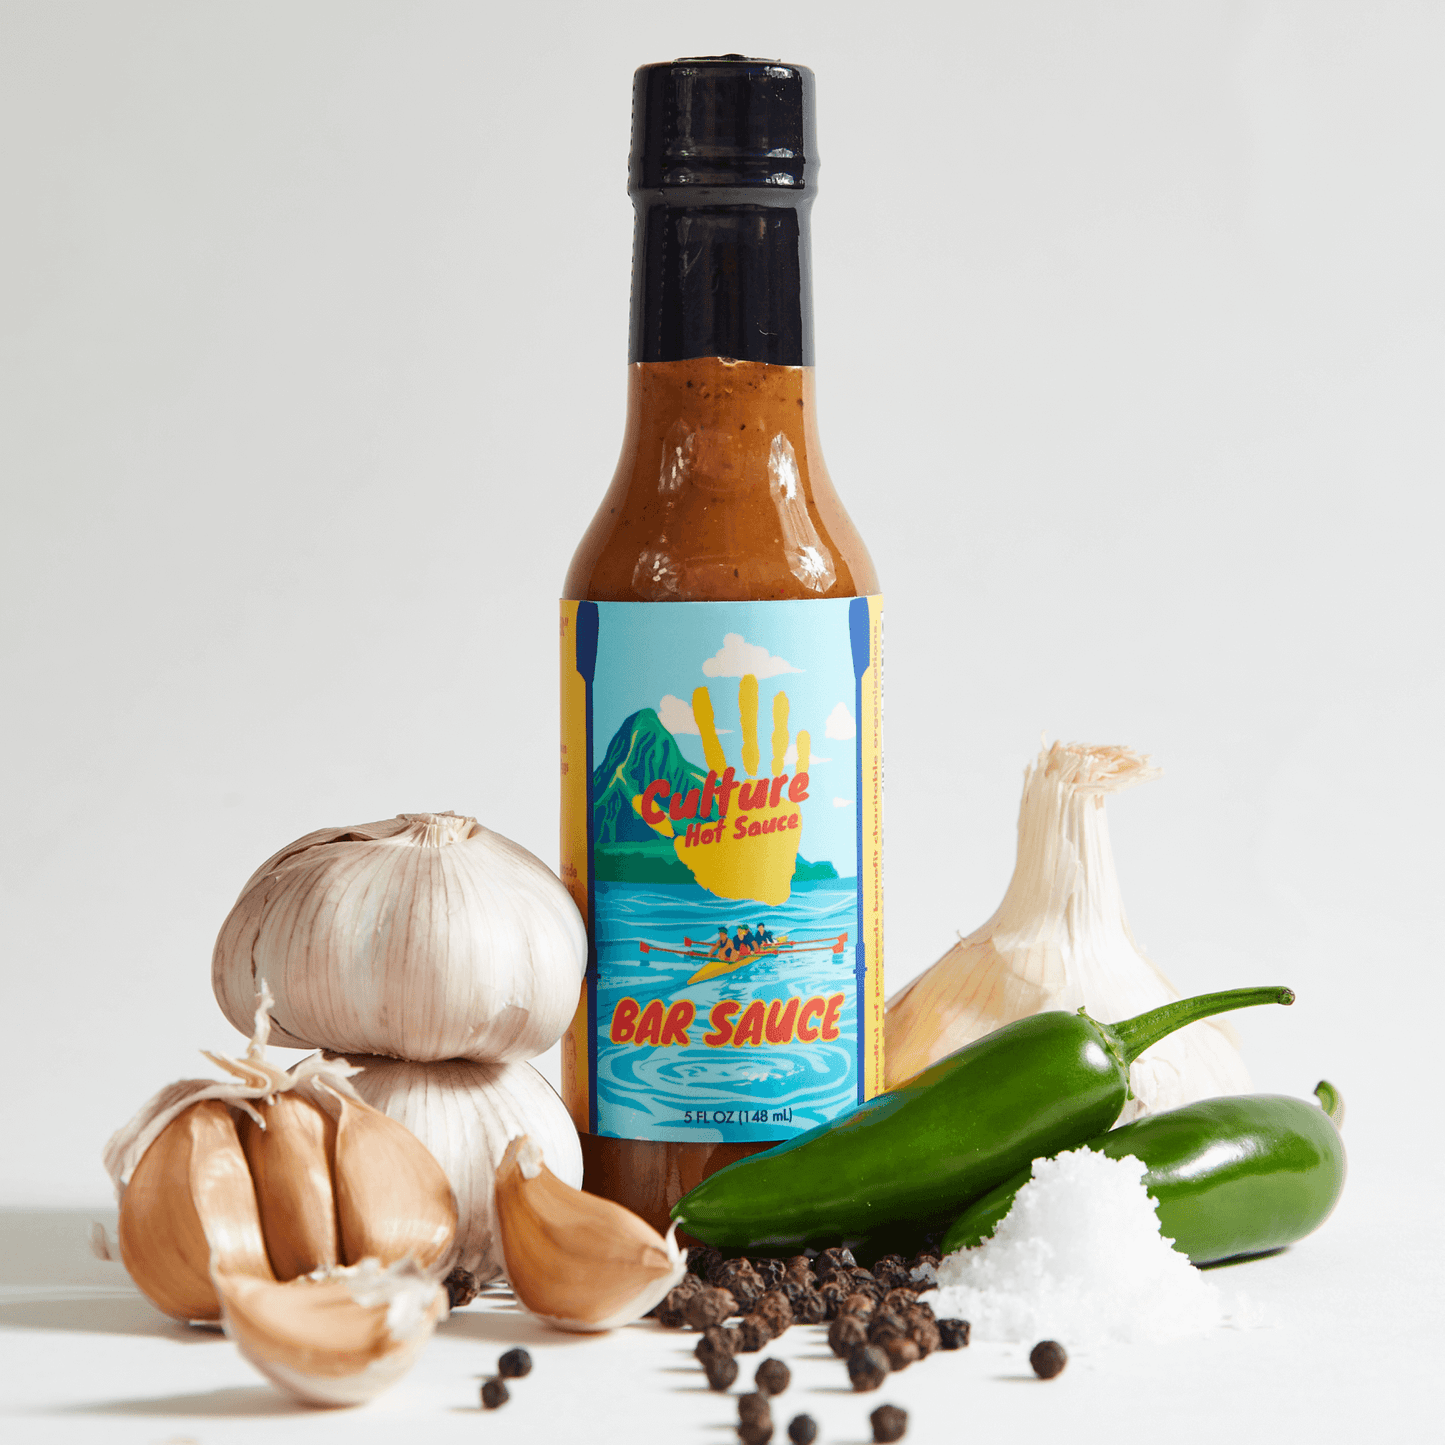 Bar sauce, best seller, garlic jalapeños salt and pepper, good on everything, most flavorful, culture hot sauce bottle, front image rowing in Hawaii